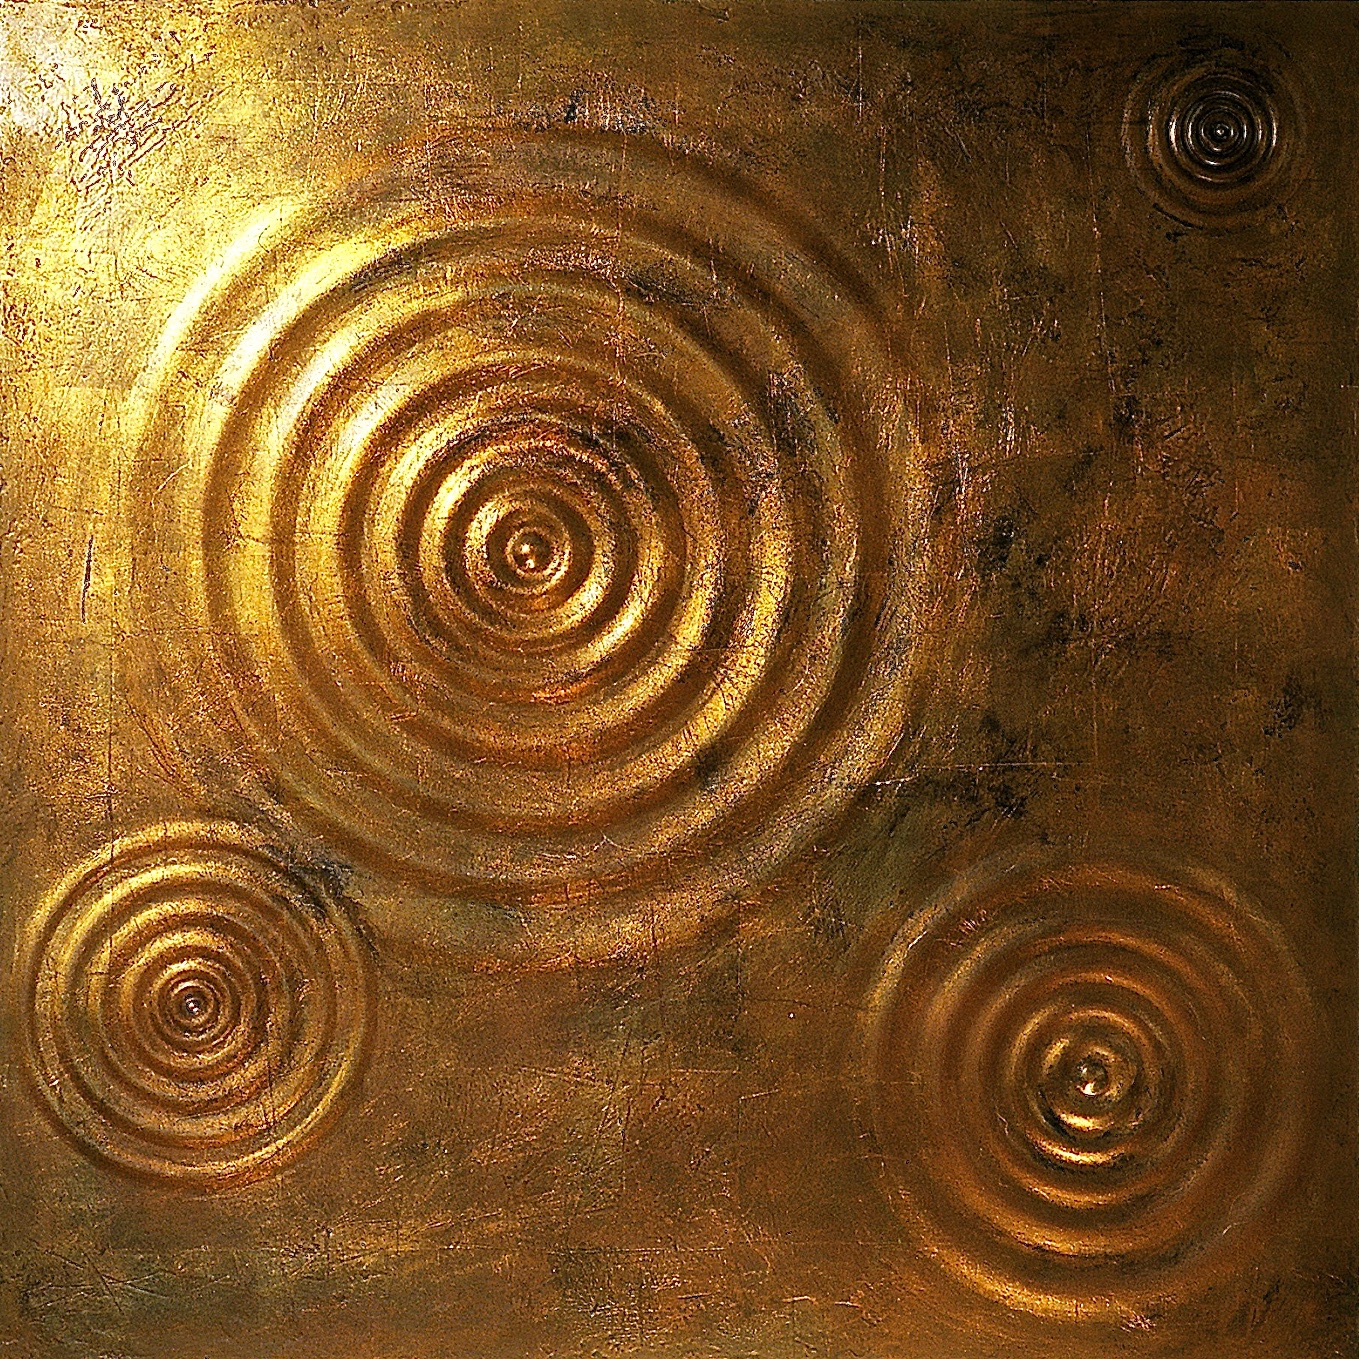 Thomas Coffin - Ripple Effect (copper leaf), 36"h x 36"w x 2"d, mixed media sculptural wall relief